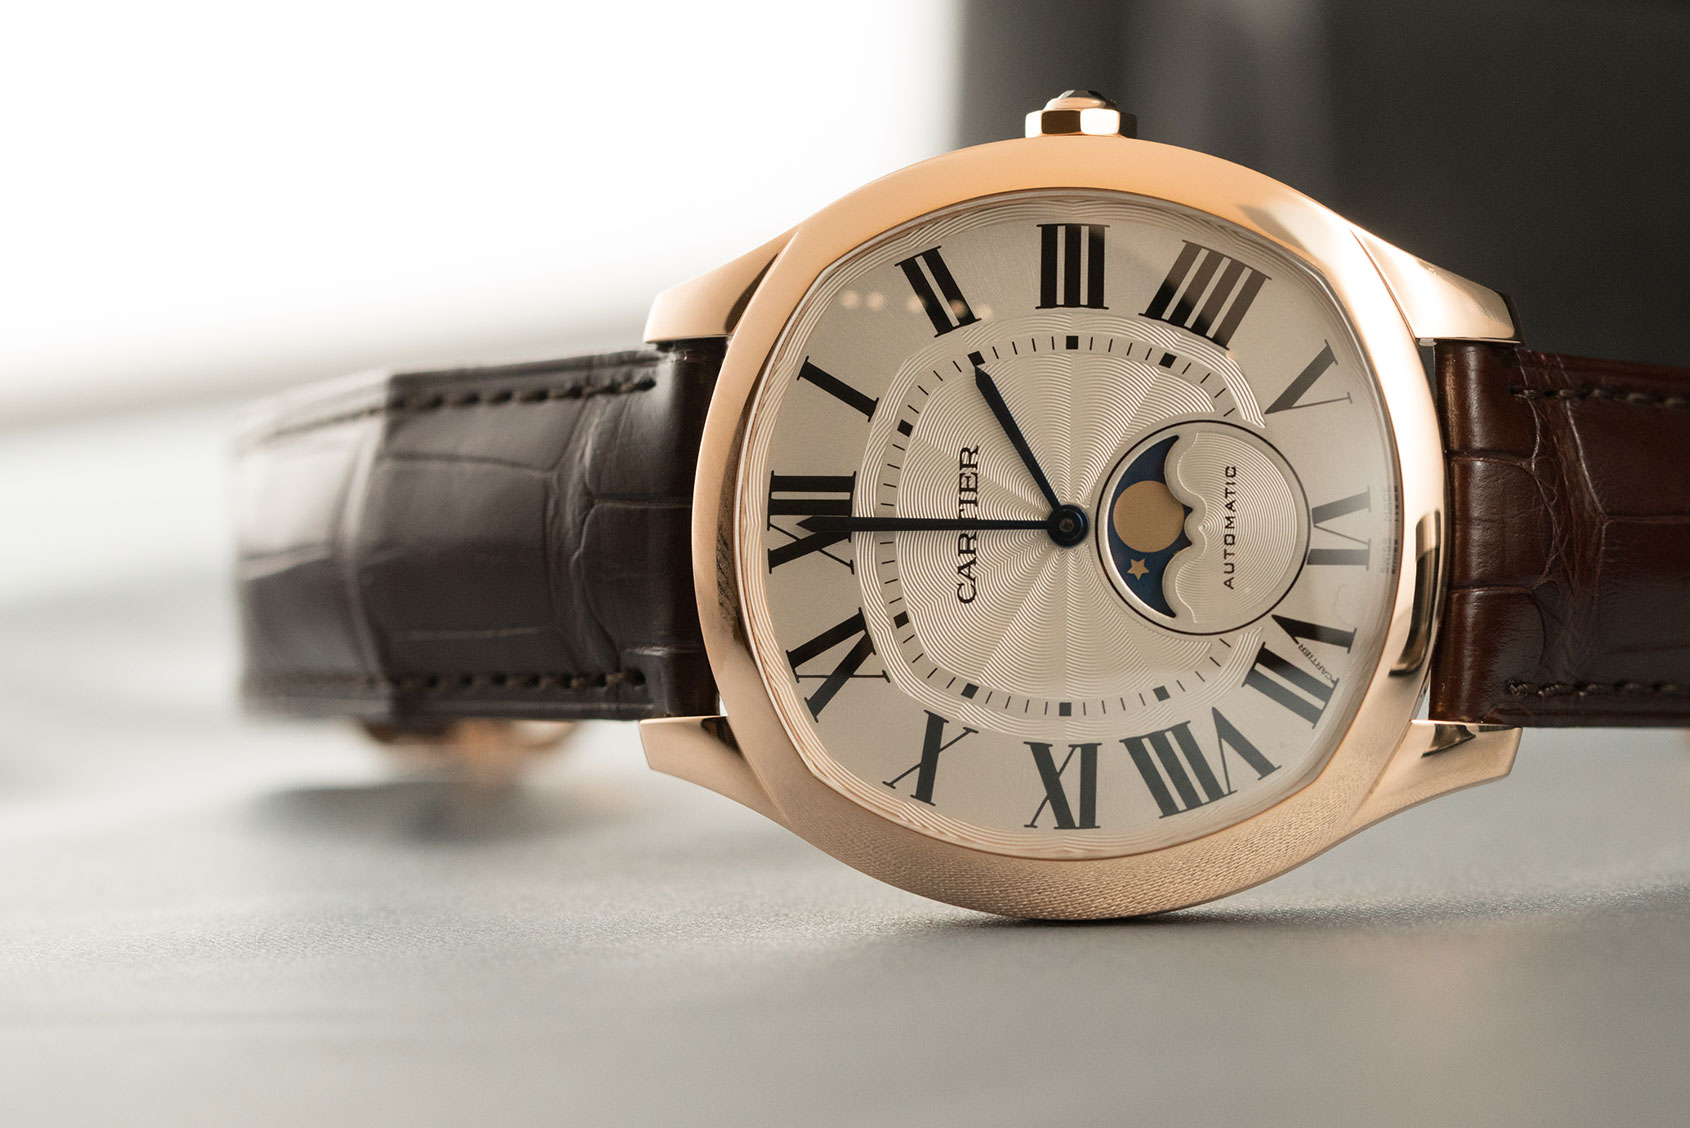 cartier drive moon phase review